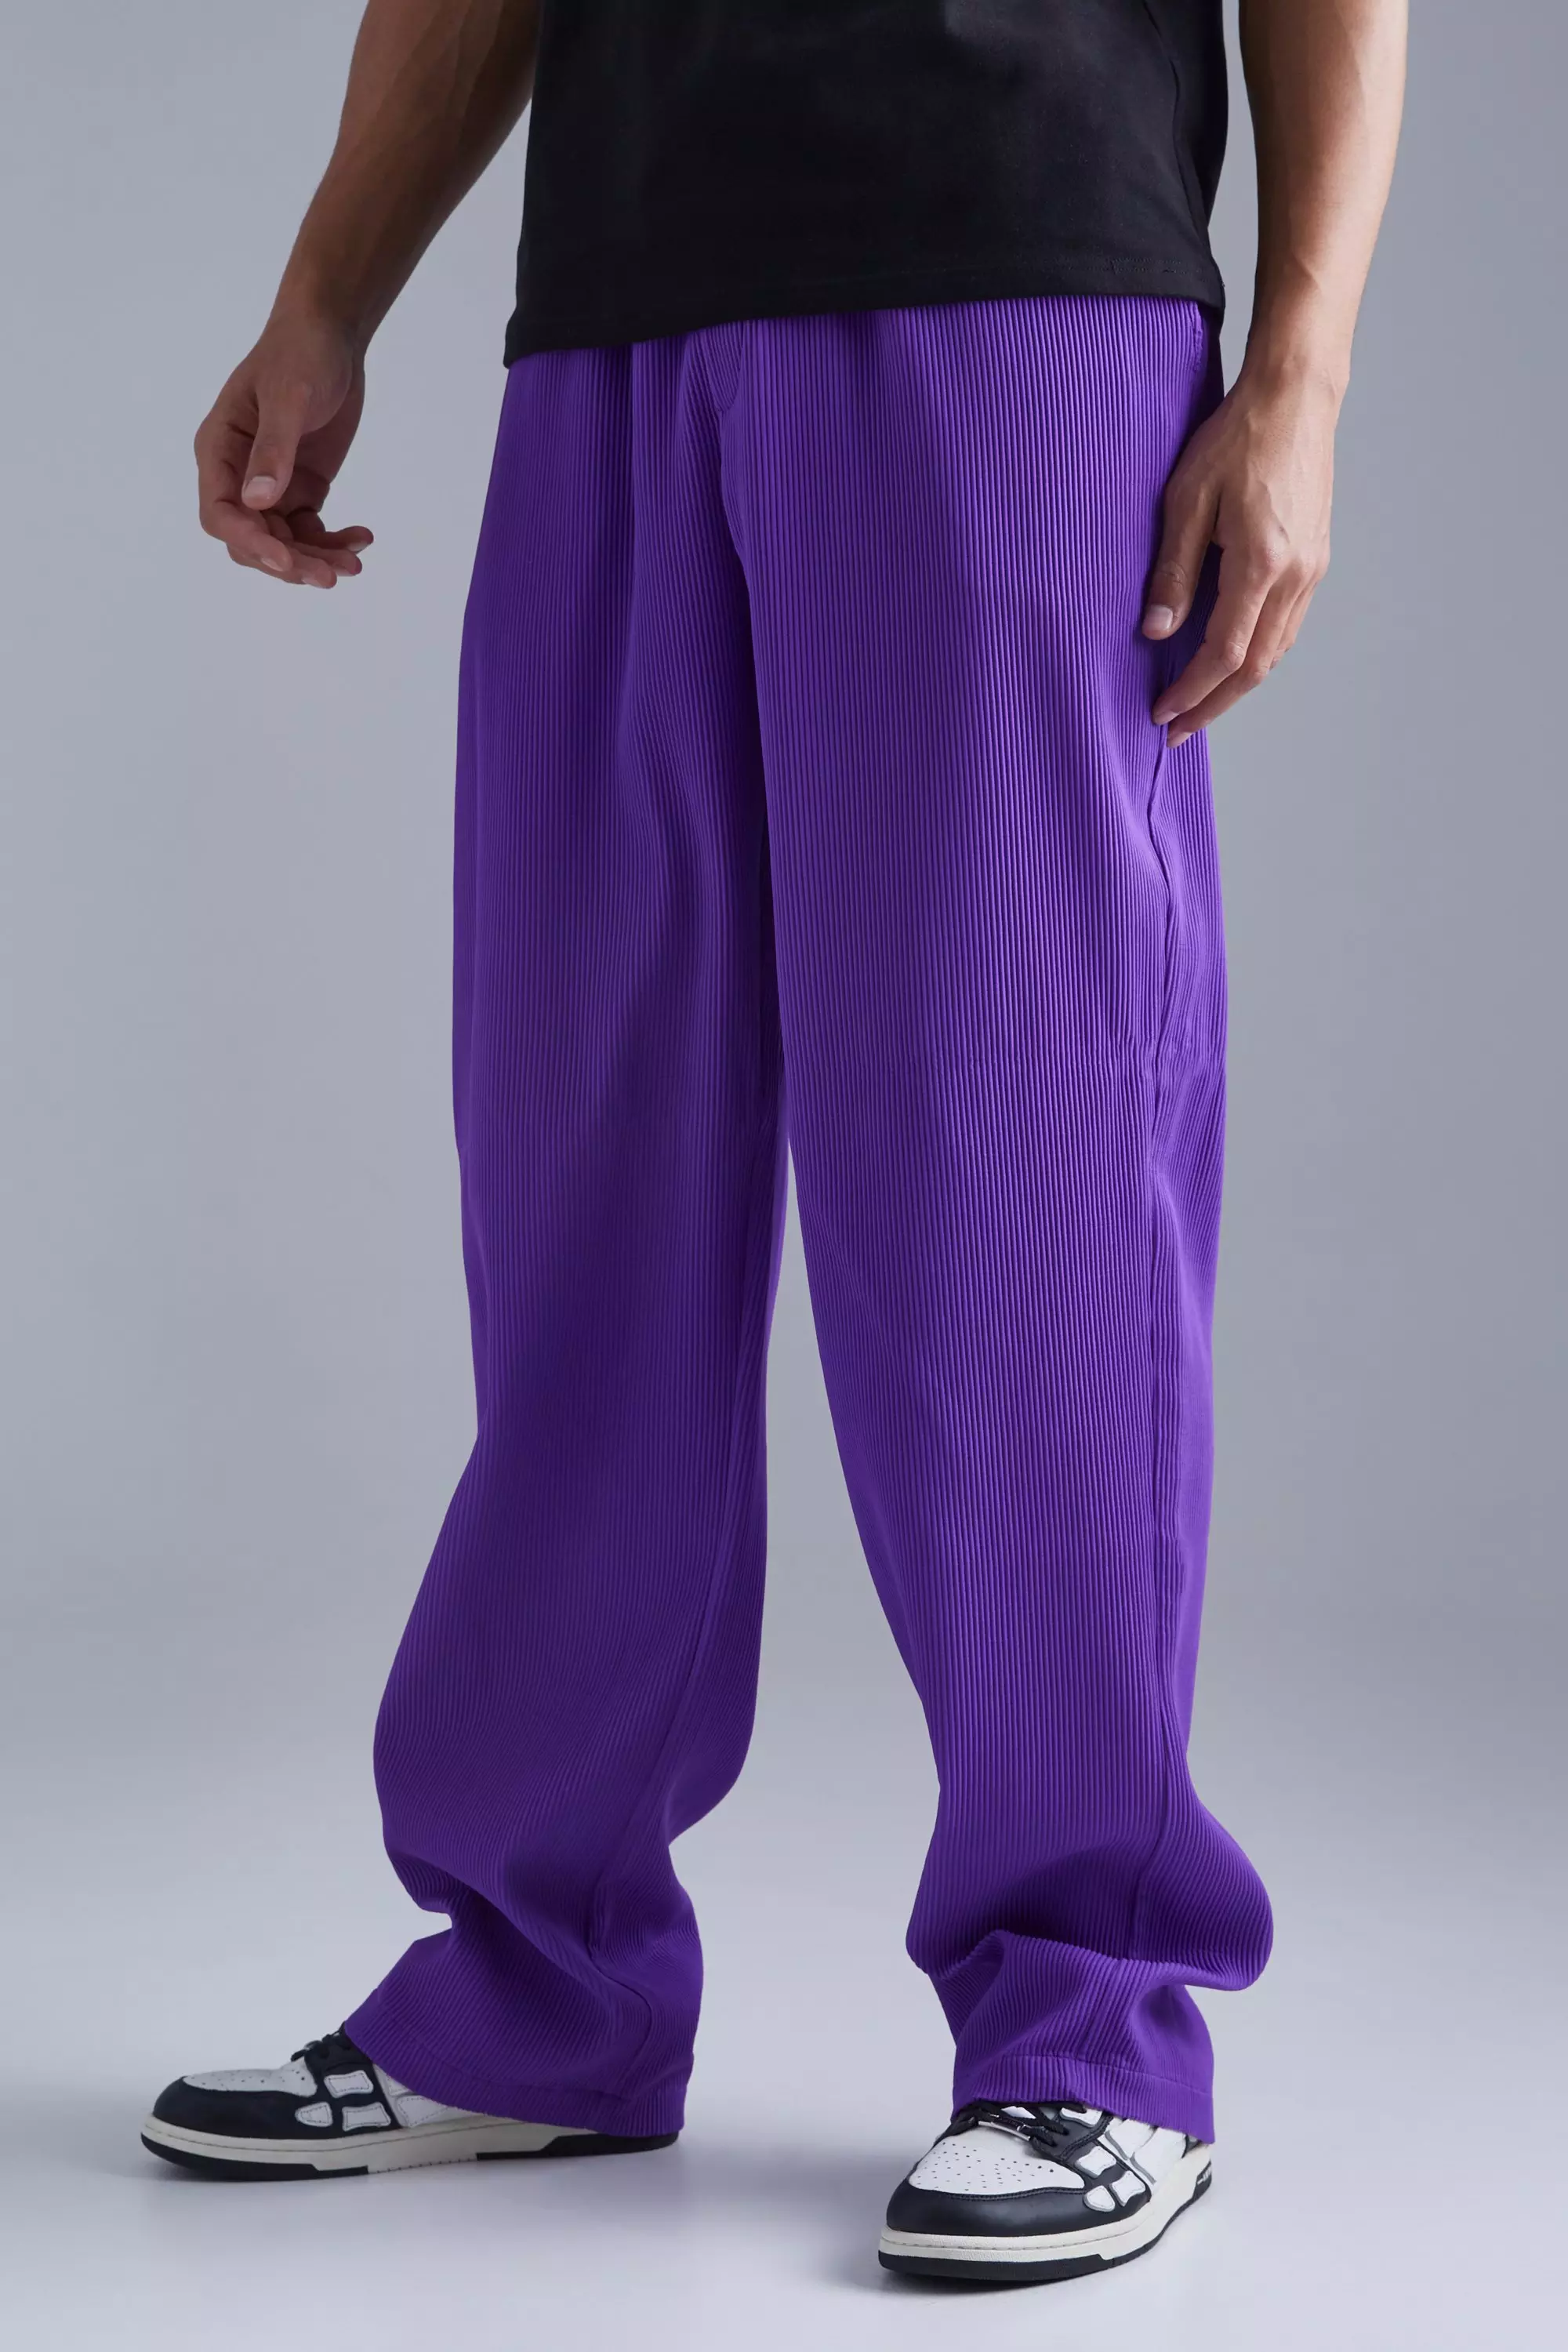 Tall Elastic Waist Relaxed Fit Pleated Pants Purple